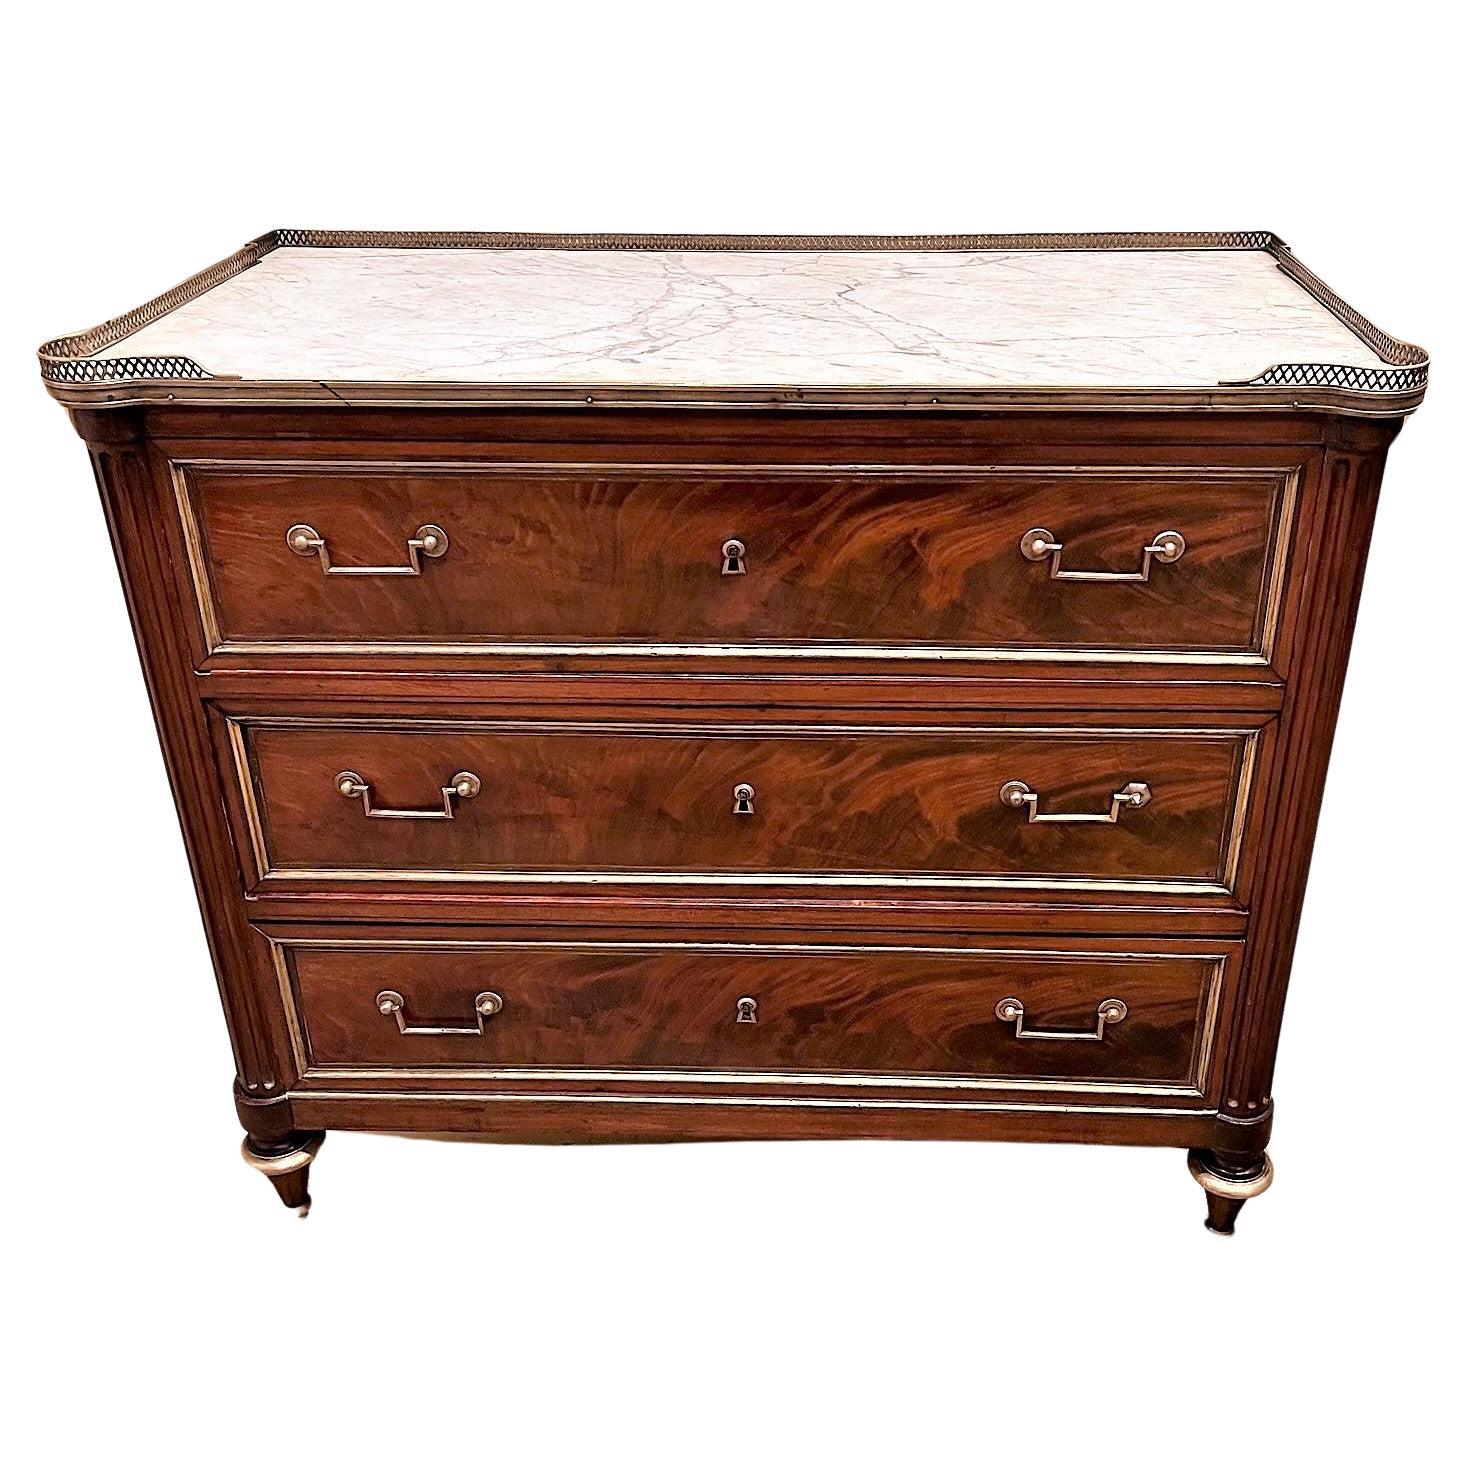 Louis XVI Style Commode with Marble Top & Bronze Mounts, France, Circa:1860